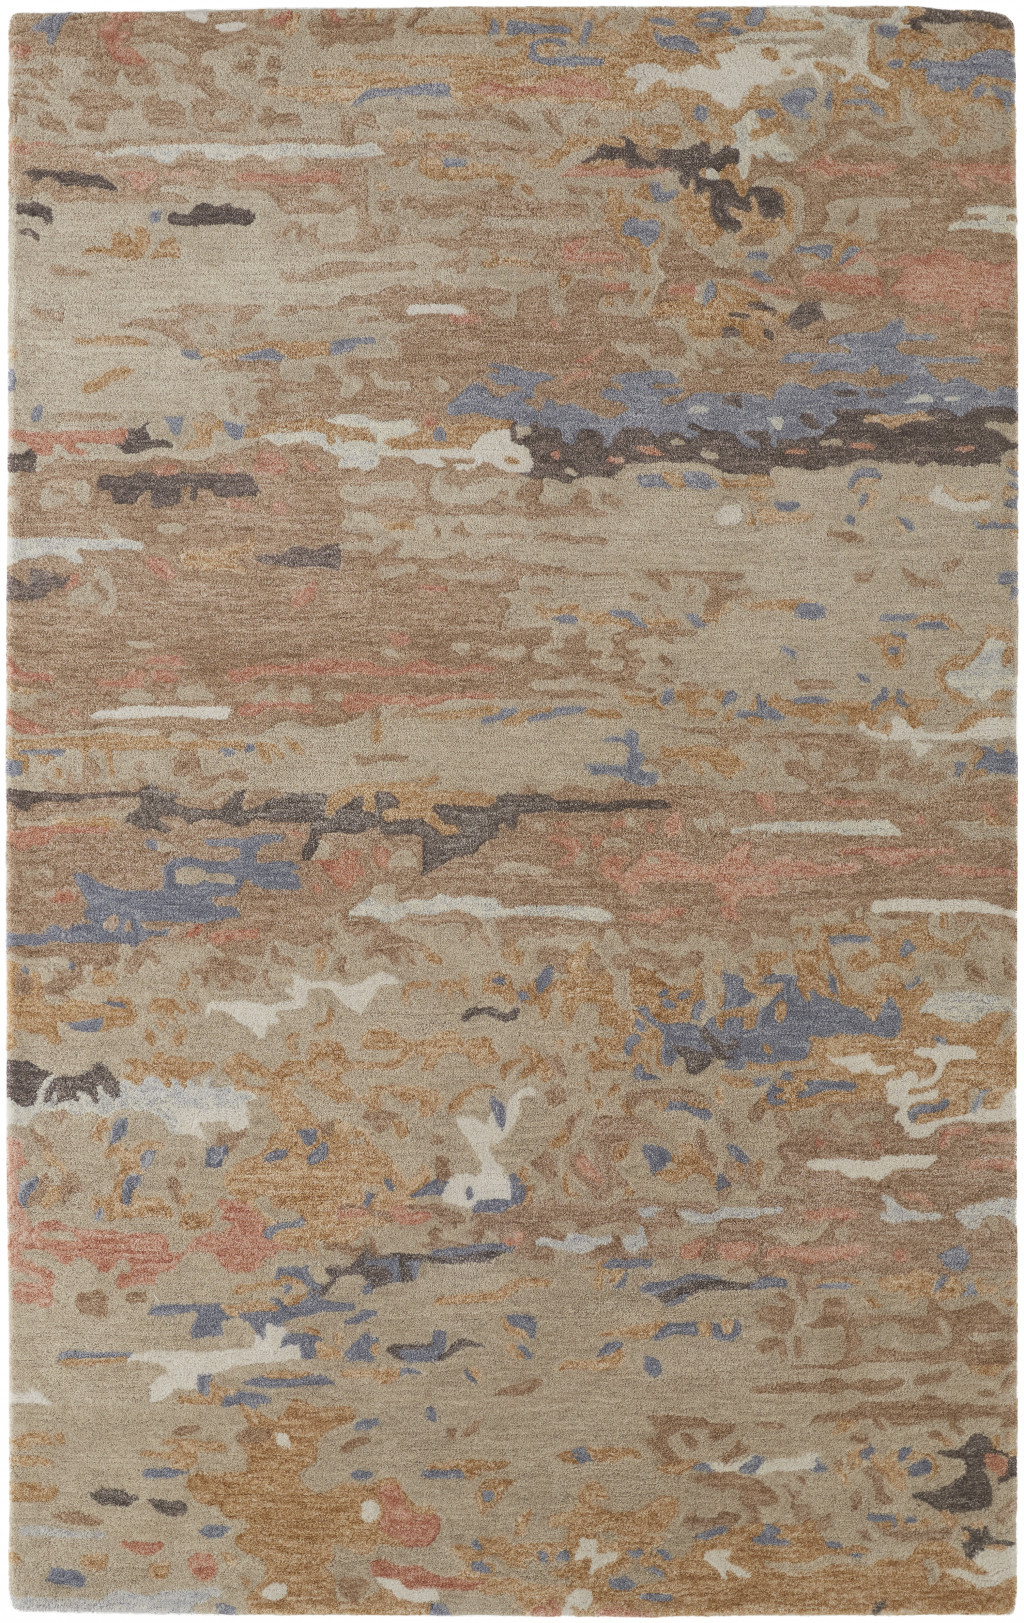 10' X 14' Tan And Blue Wool Abstract Tufted Handmade Stain Resistant Area Rug-513611-1